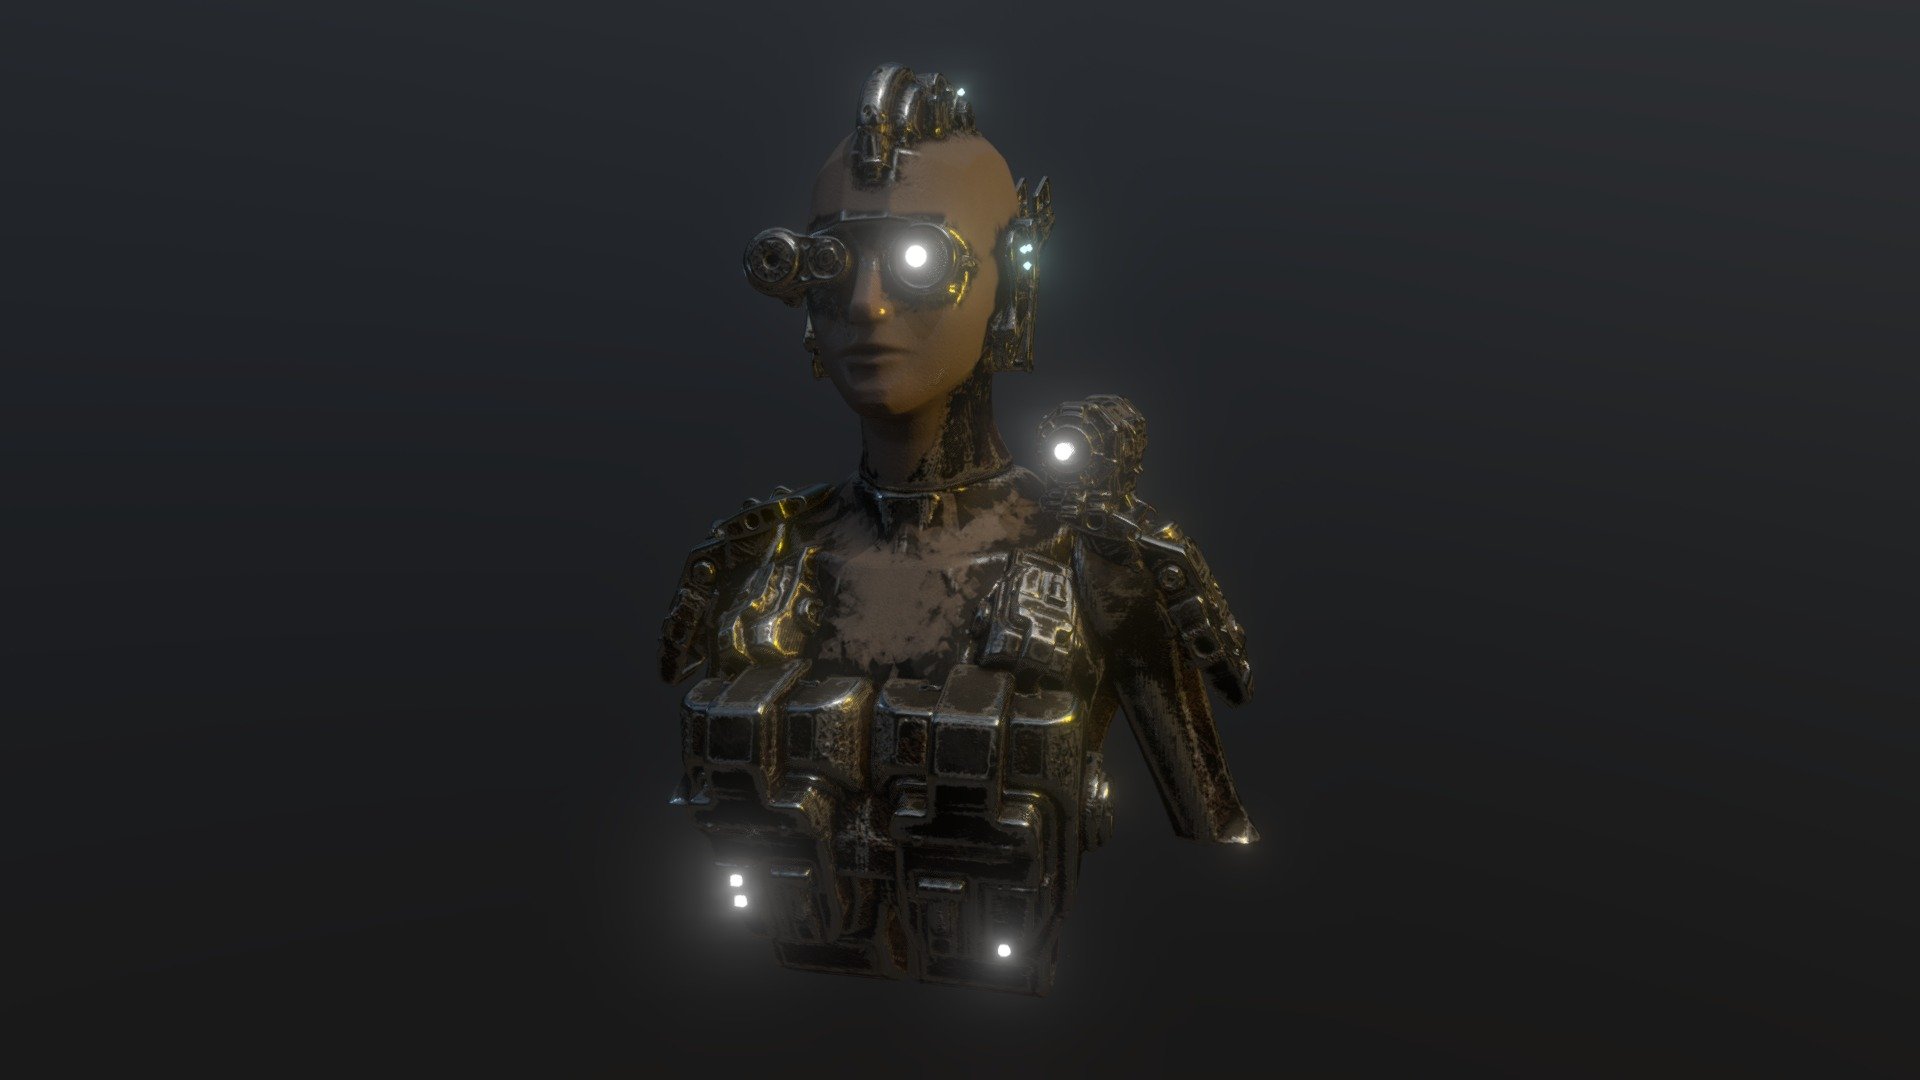 Another model for the #OculusKitbashChallenge 

This time a female with robot parts. Very fashionable.

Created with Oculus Medium and textured with Substance Painter 3d model